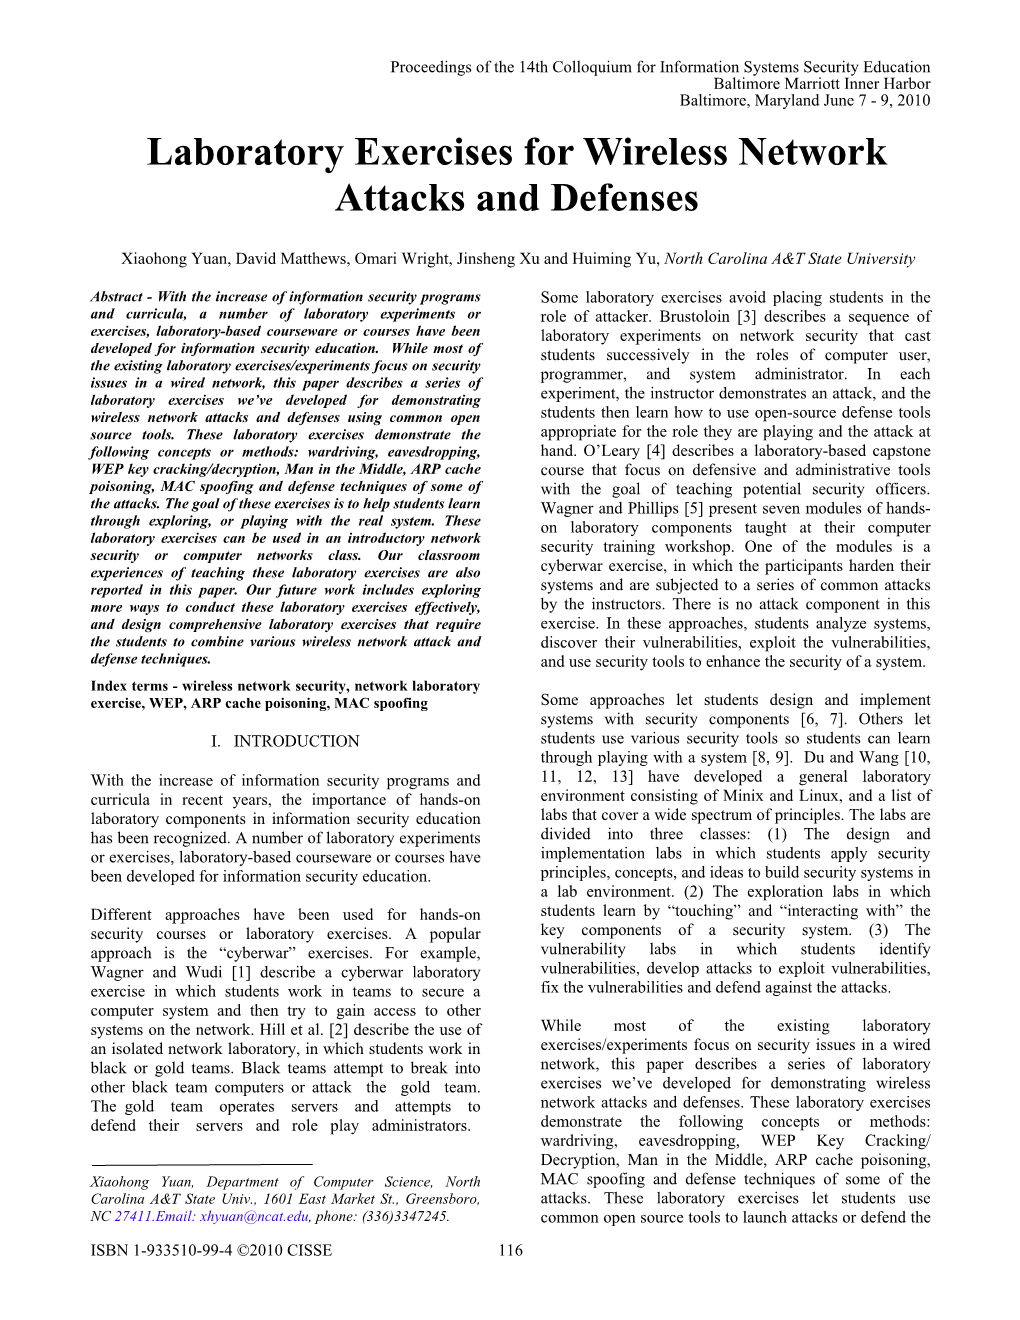 Laboratory Exercises for Wireless Network Attacks and Defenses